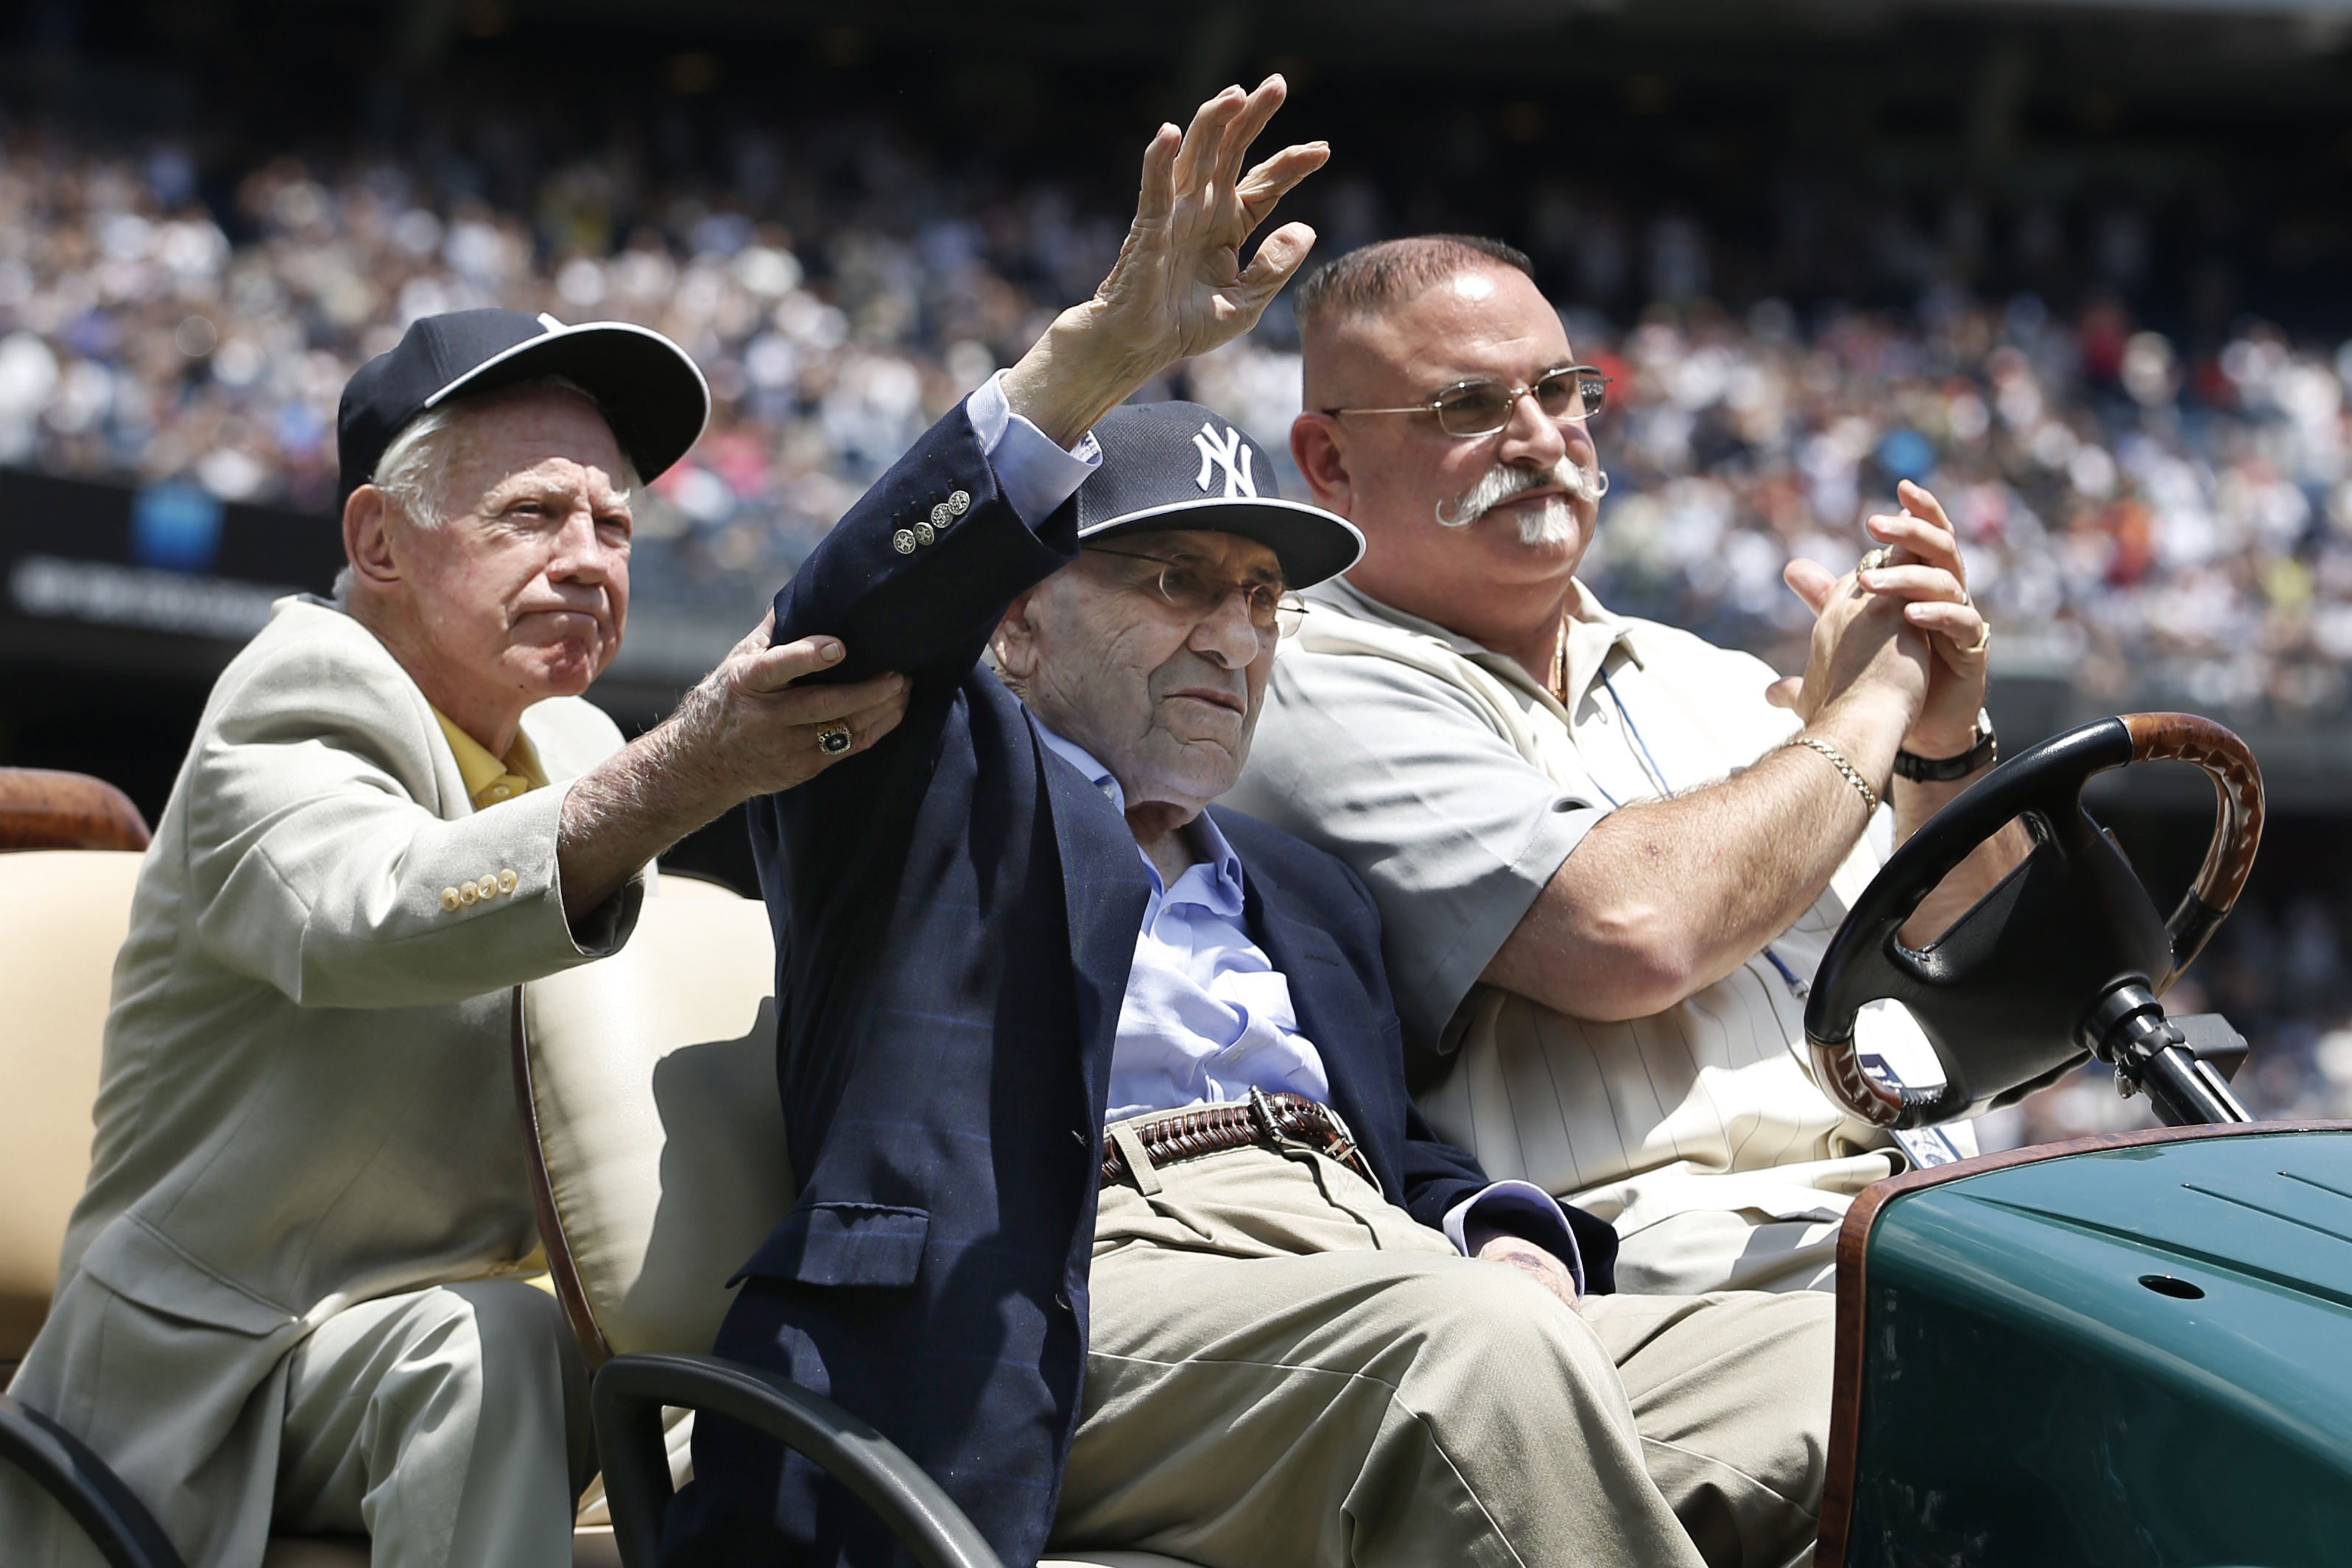 Hall of Fame pitcher Whitey Ford, left, helps former teammate and Hall of Famer catcher Yogi Berra as Berra is introduced during the 68th annual Old Timers Day prior to the Baltimore Orioles baseball game against the New York Yankees at Yankee Stadium in New York, Sunday, June 22, 2014. (AP Photo/Kathy Willens)